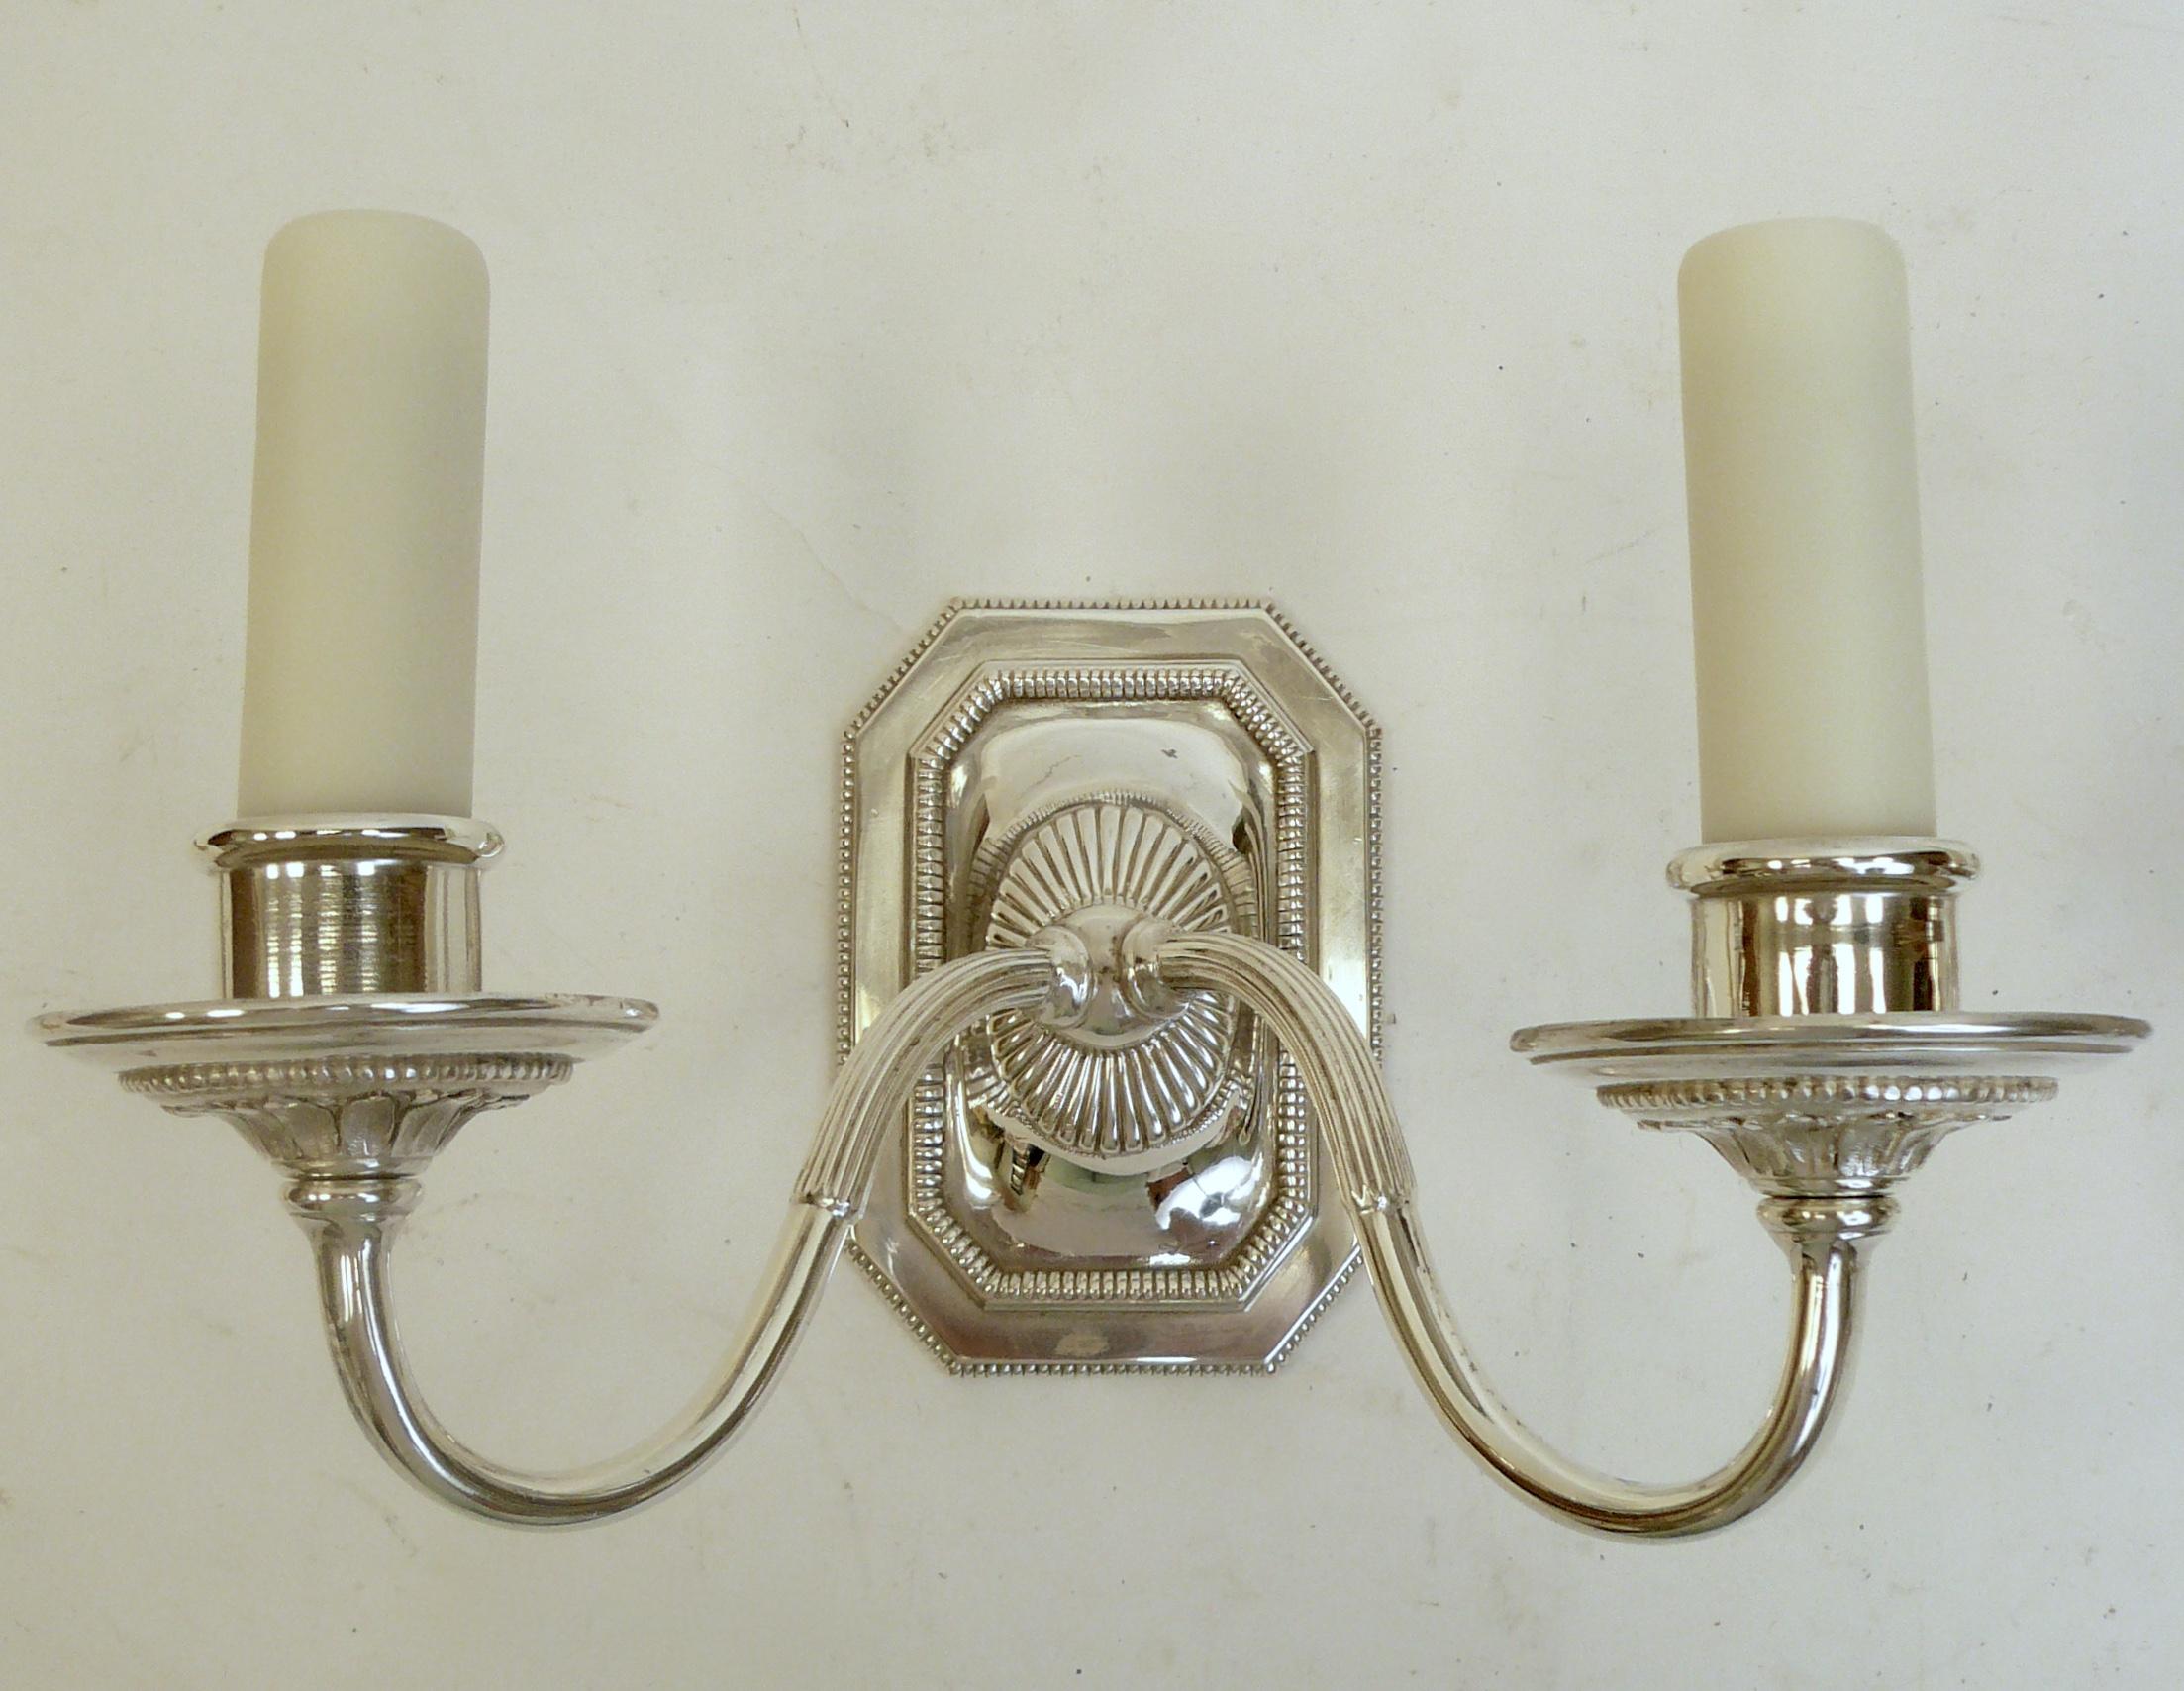 These handsome George III style sconces by renowned maker Edward F. Caldwell feature Classical motifs, including acanthus leaves, and beaded borders.